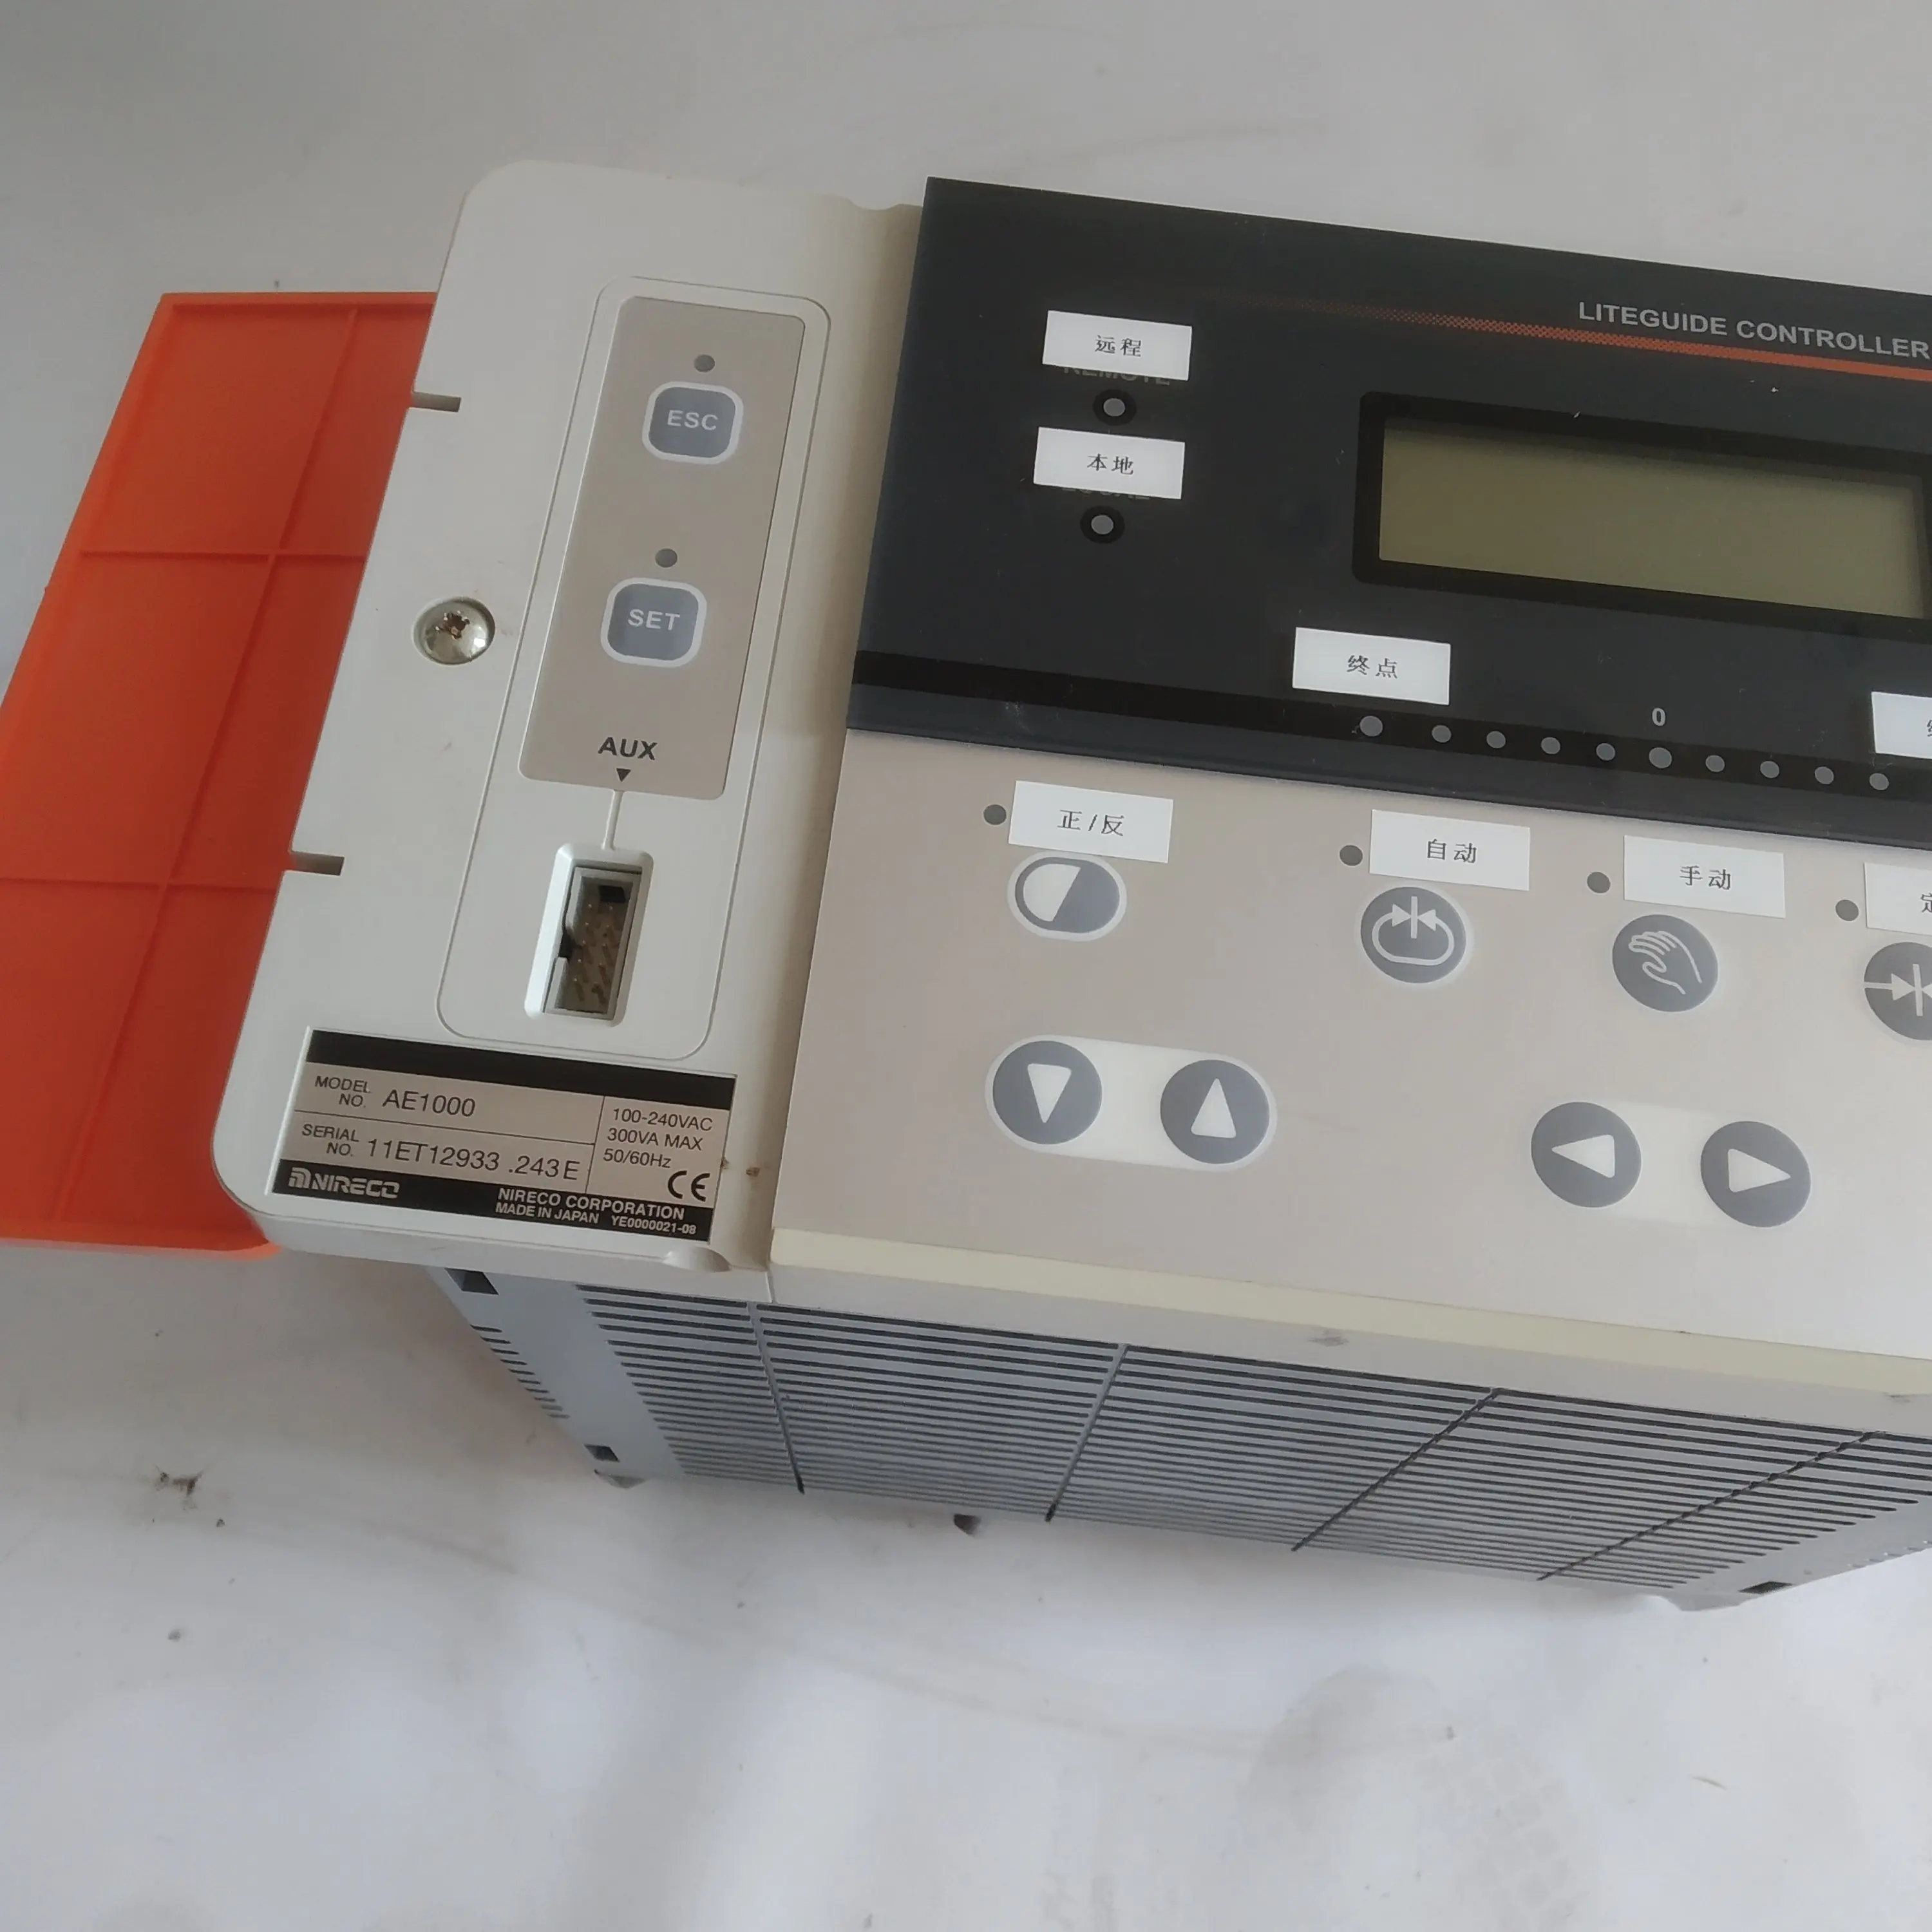 Nireco Liteguide Controller Ae1000 Used In Good Condition ...